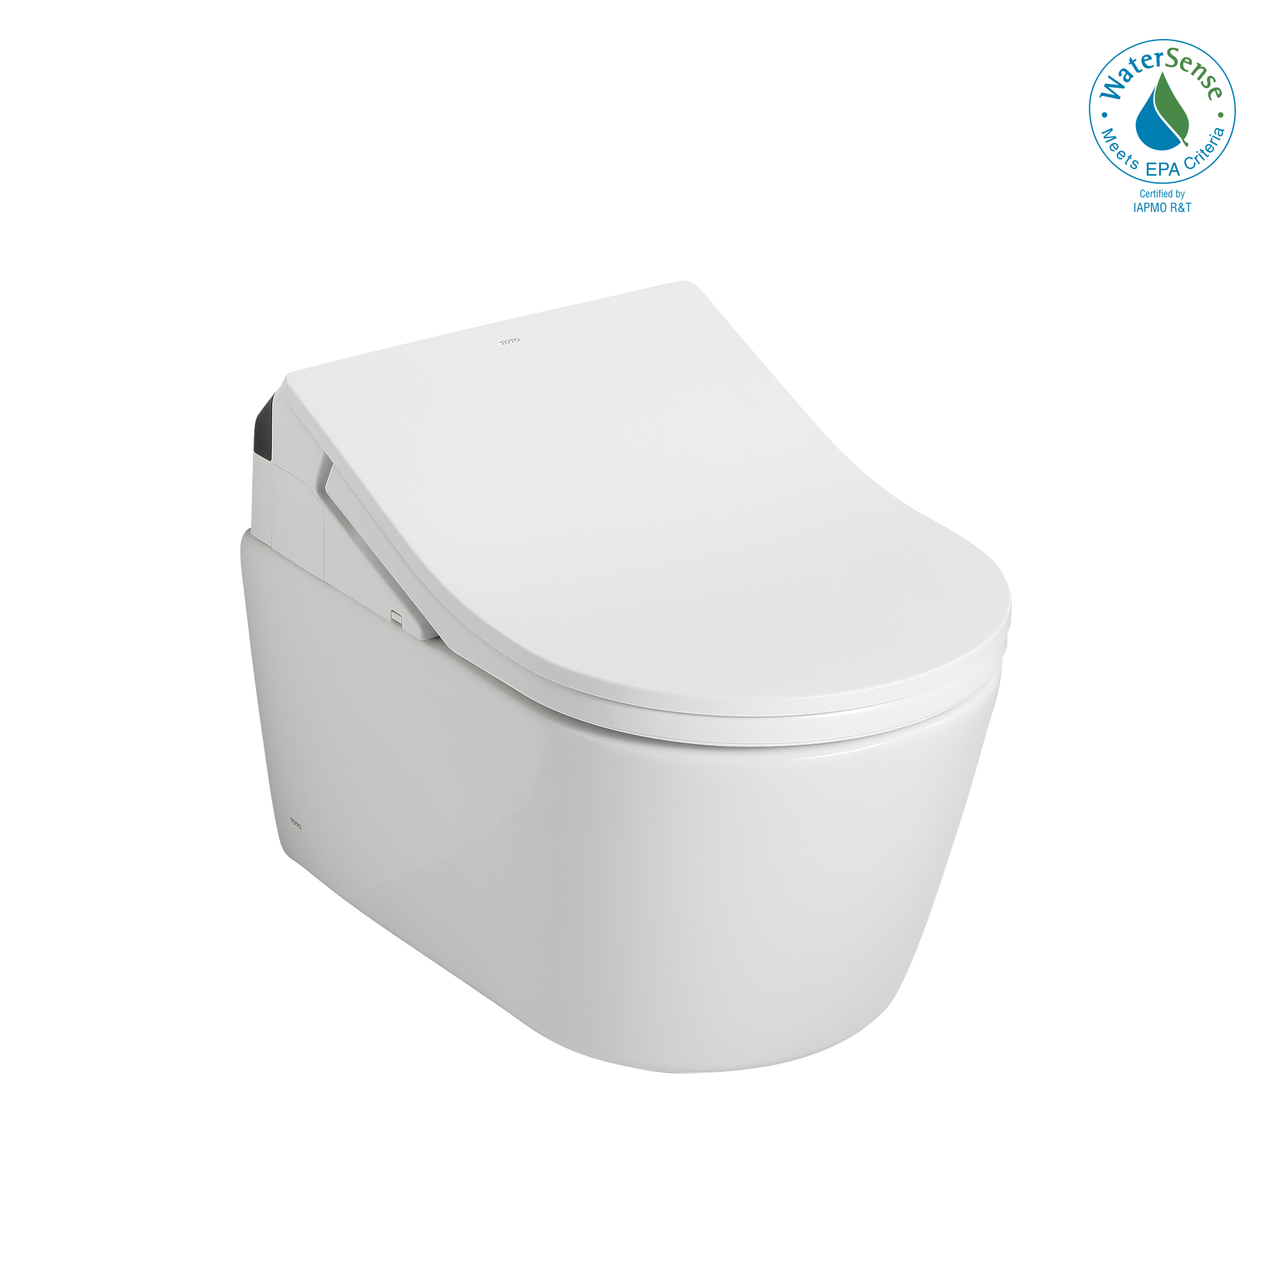 TOTO WASHLET+ RP Wall-Hung D-Shape Toilet with RX Bidet Seat and DuoFit In-Wall 1.28 and 0.9 GPF Dual-Flush Tank System, Matte Silver - CWT447247CMFG#MS - BNGBath